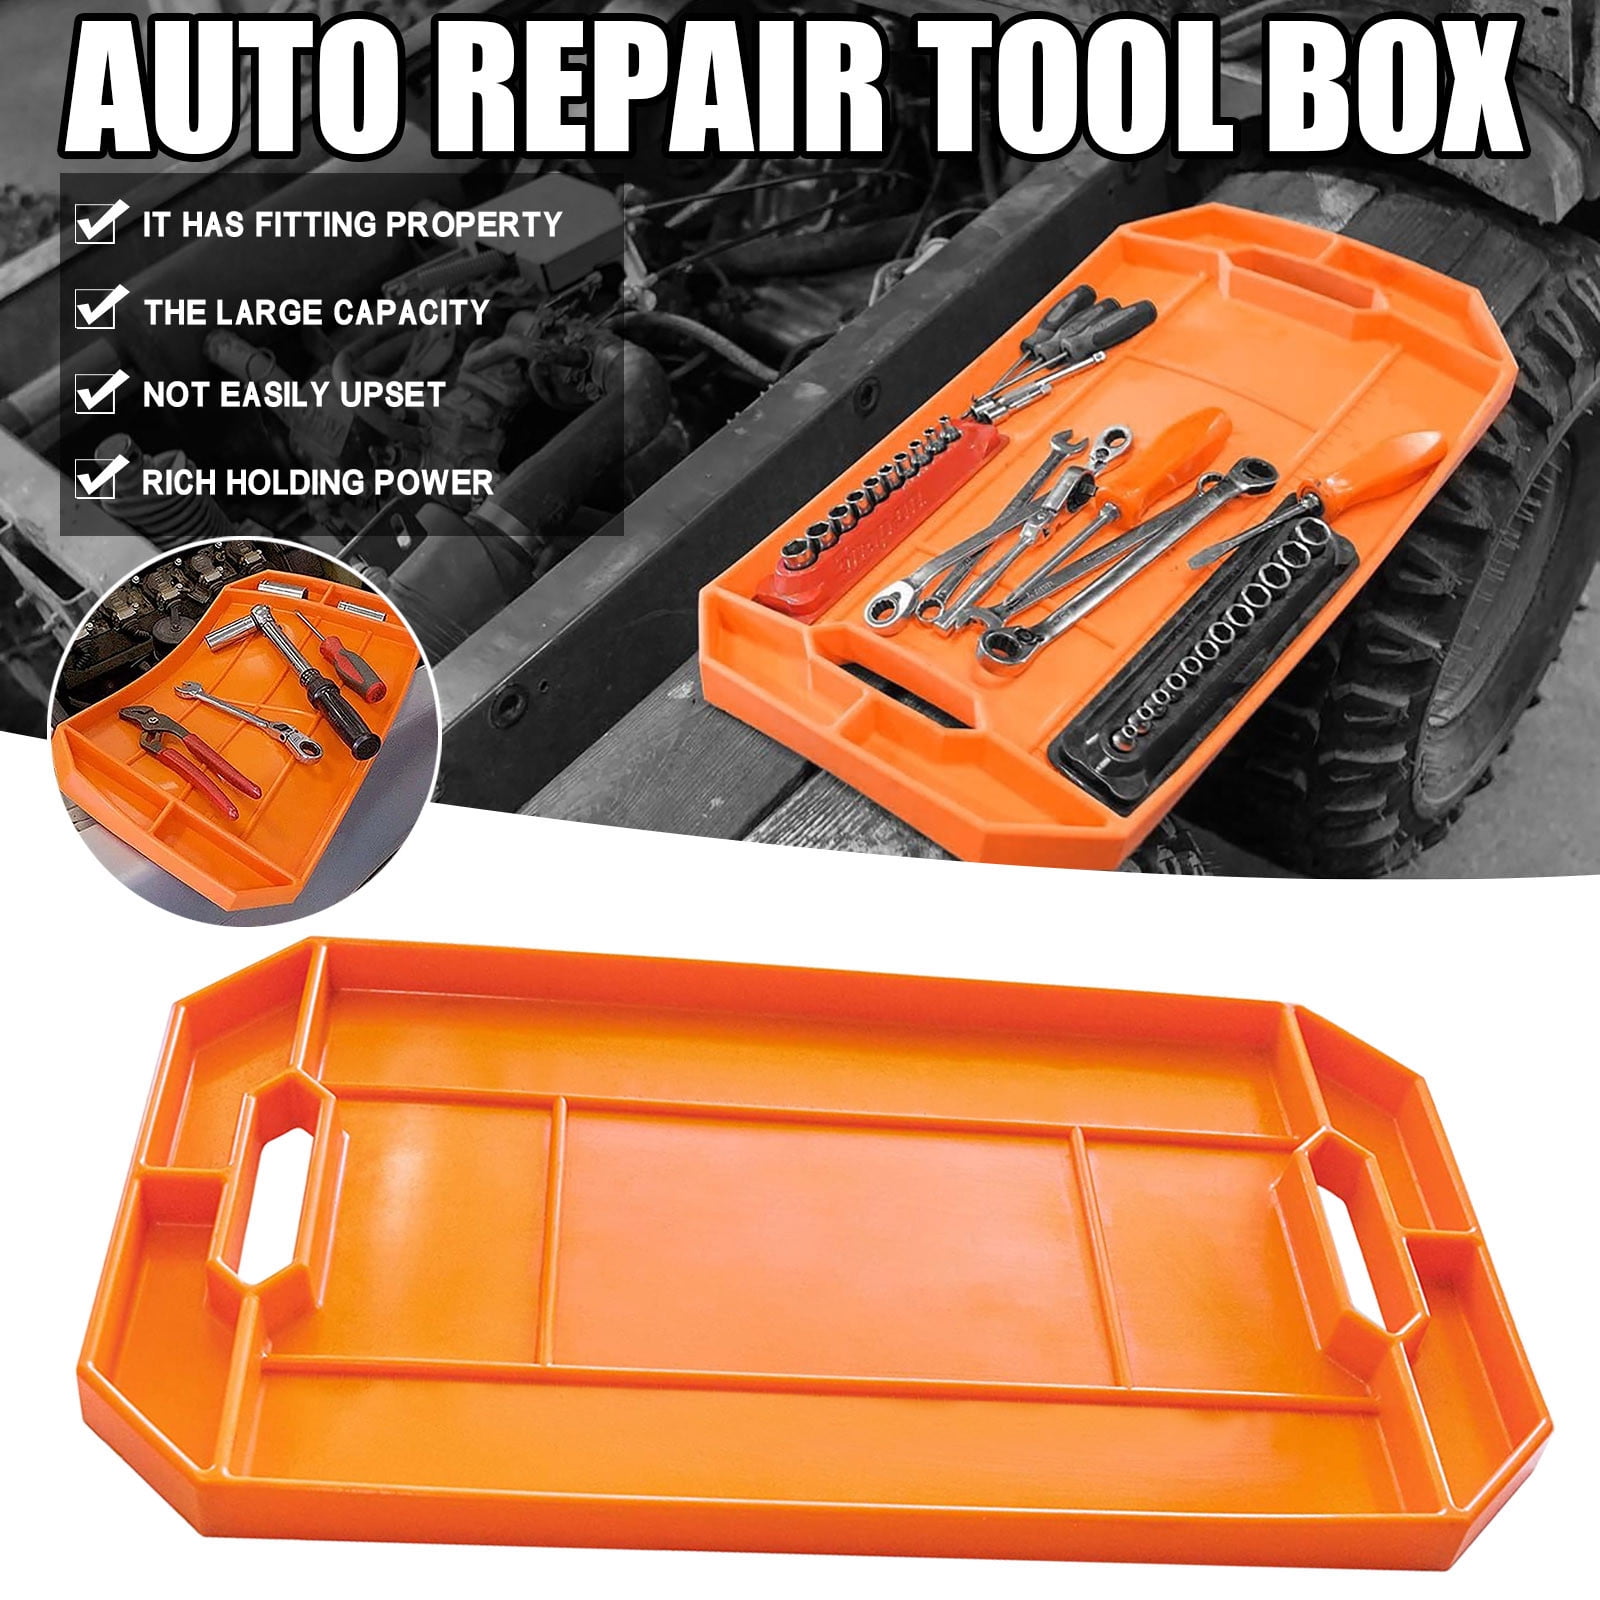 Premium Tool Holder Mats Easy Clean Up Red No Magnets Grip Mat Non-Slip Flexible Tray Tool Box Organizer 